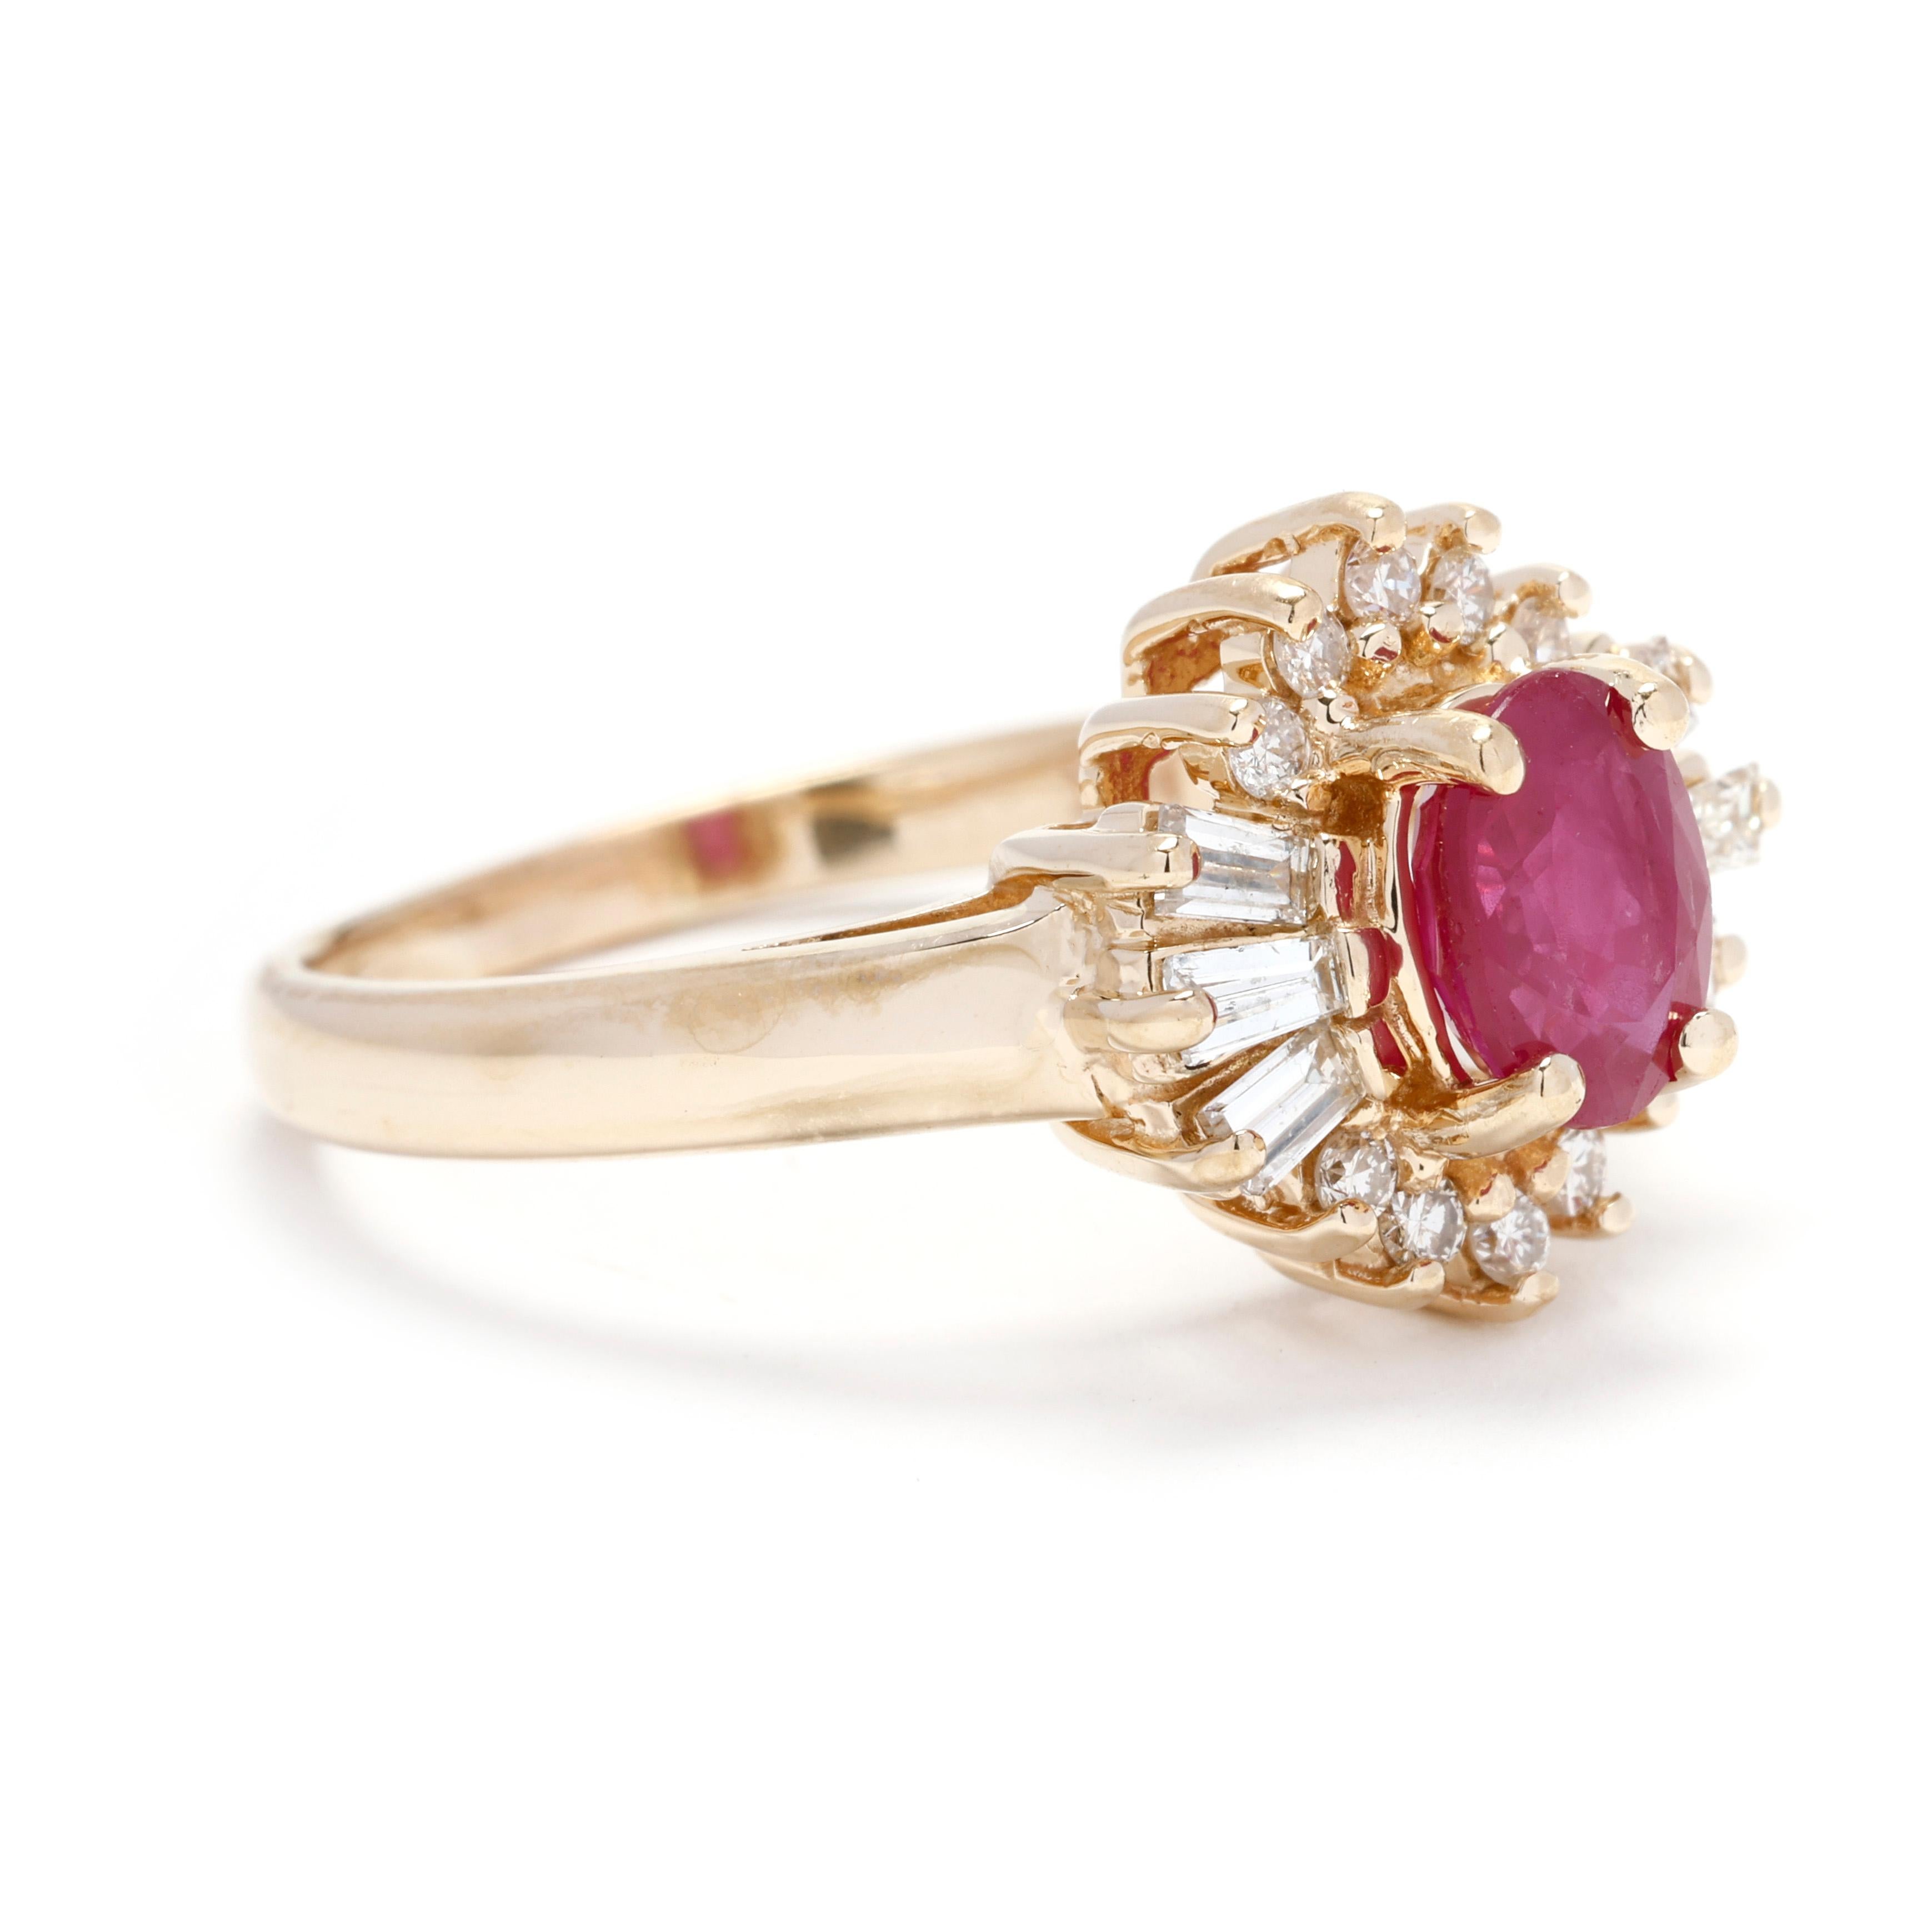 Indulge in the allure of luxury with this captivating 1.35ctw Ruby and Diamond Statement Ring. Crafted in radiant 14k yellow gold, this exquisite ring features a vibrant ruby centerpiece accented by dazzling diamonds, creating a truly show-stopping